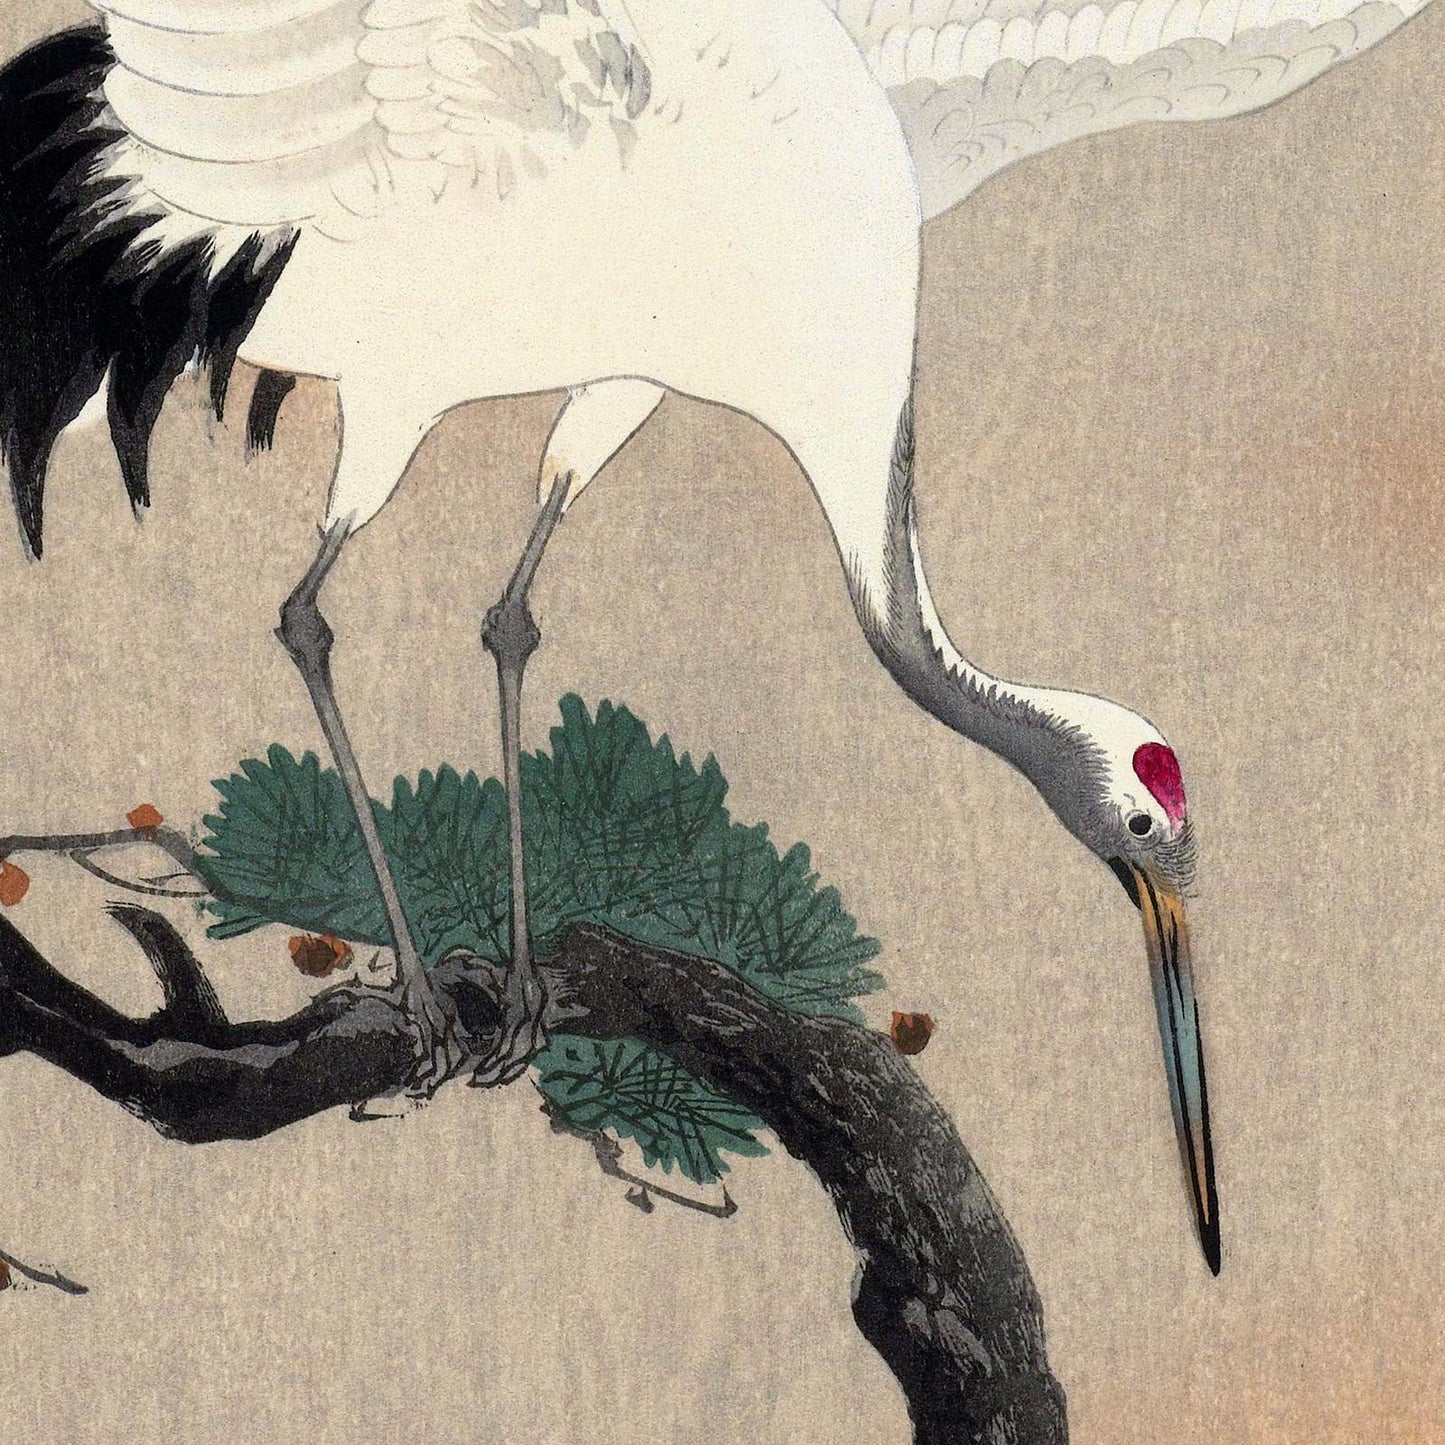 Japanese Crane with babies by Koson Wall Hanging